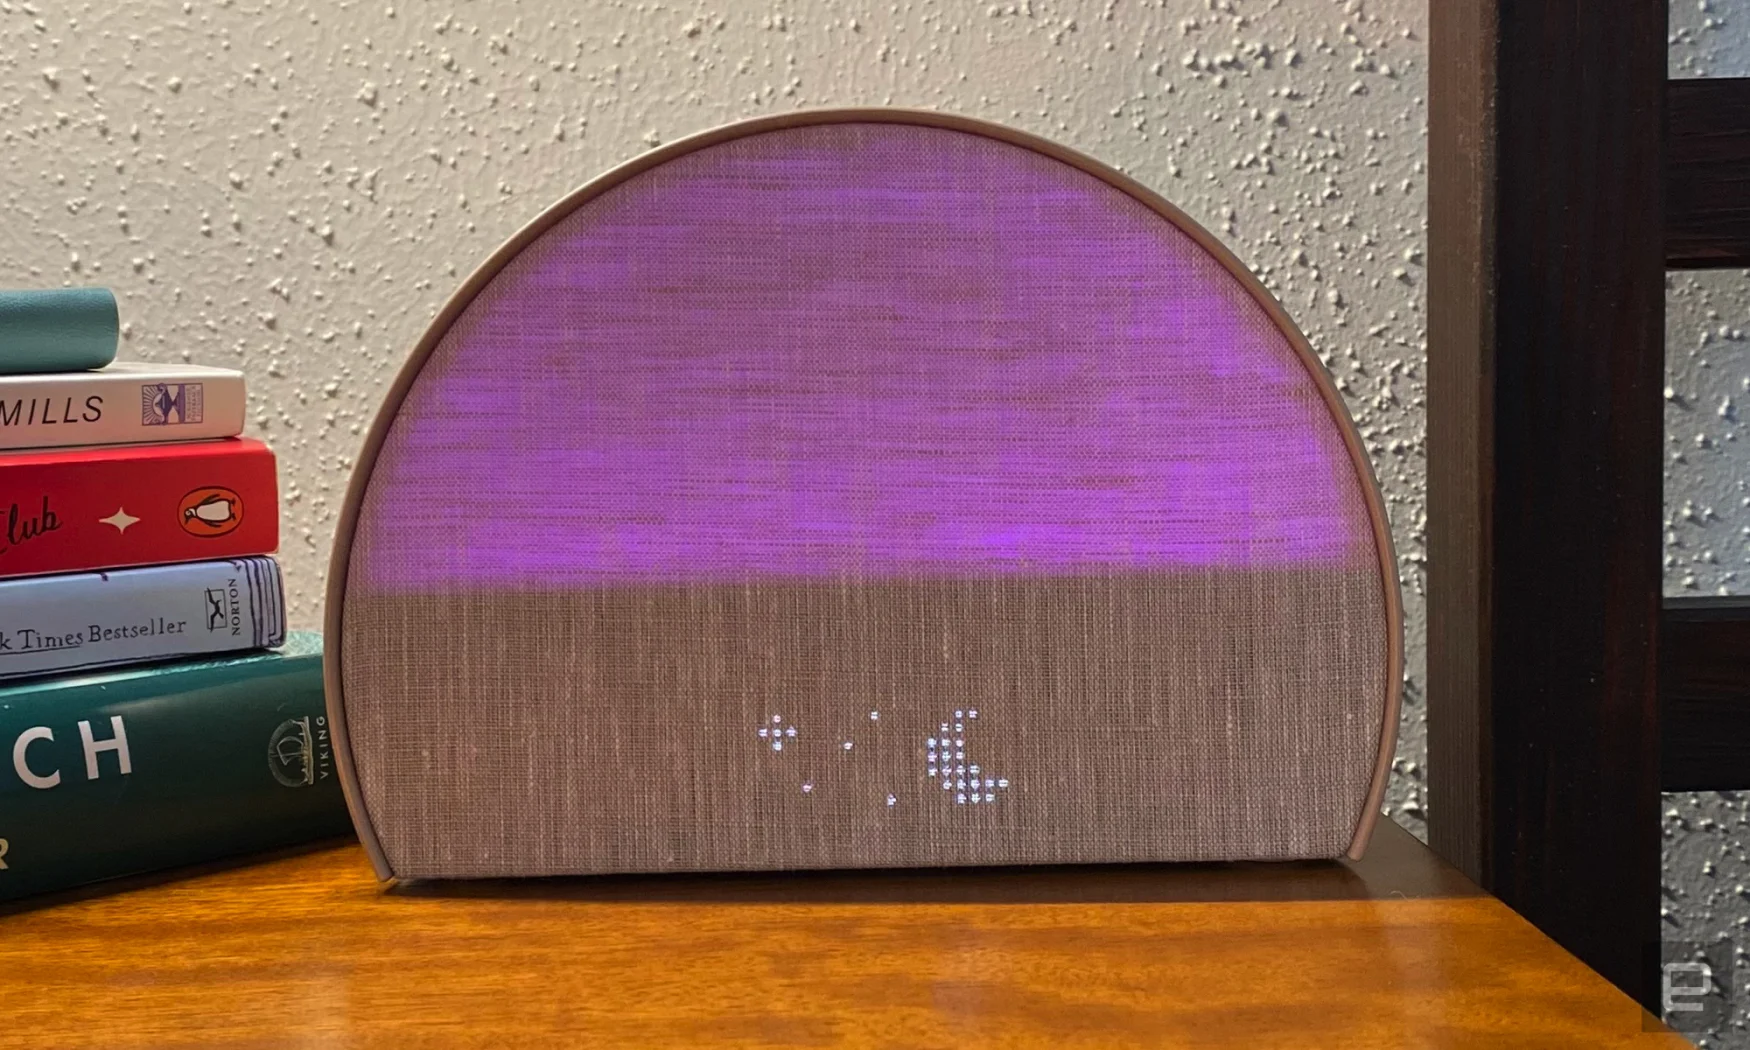 The Hatch Restore 2 lights up purple and displays a dot-matrix LED moon and stars. The unit sits on a wooden bedside table and the corner of a few books are stacked in the background. 